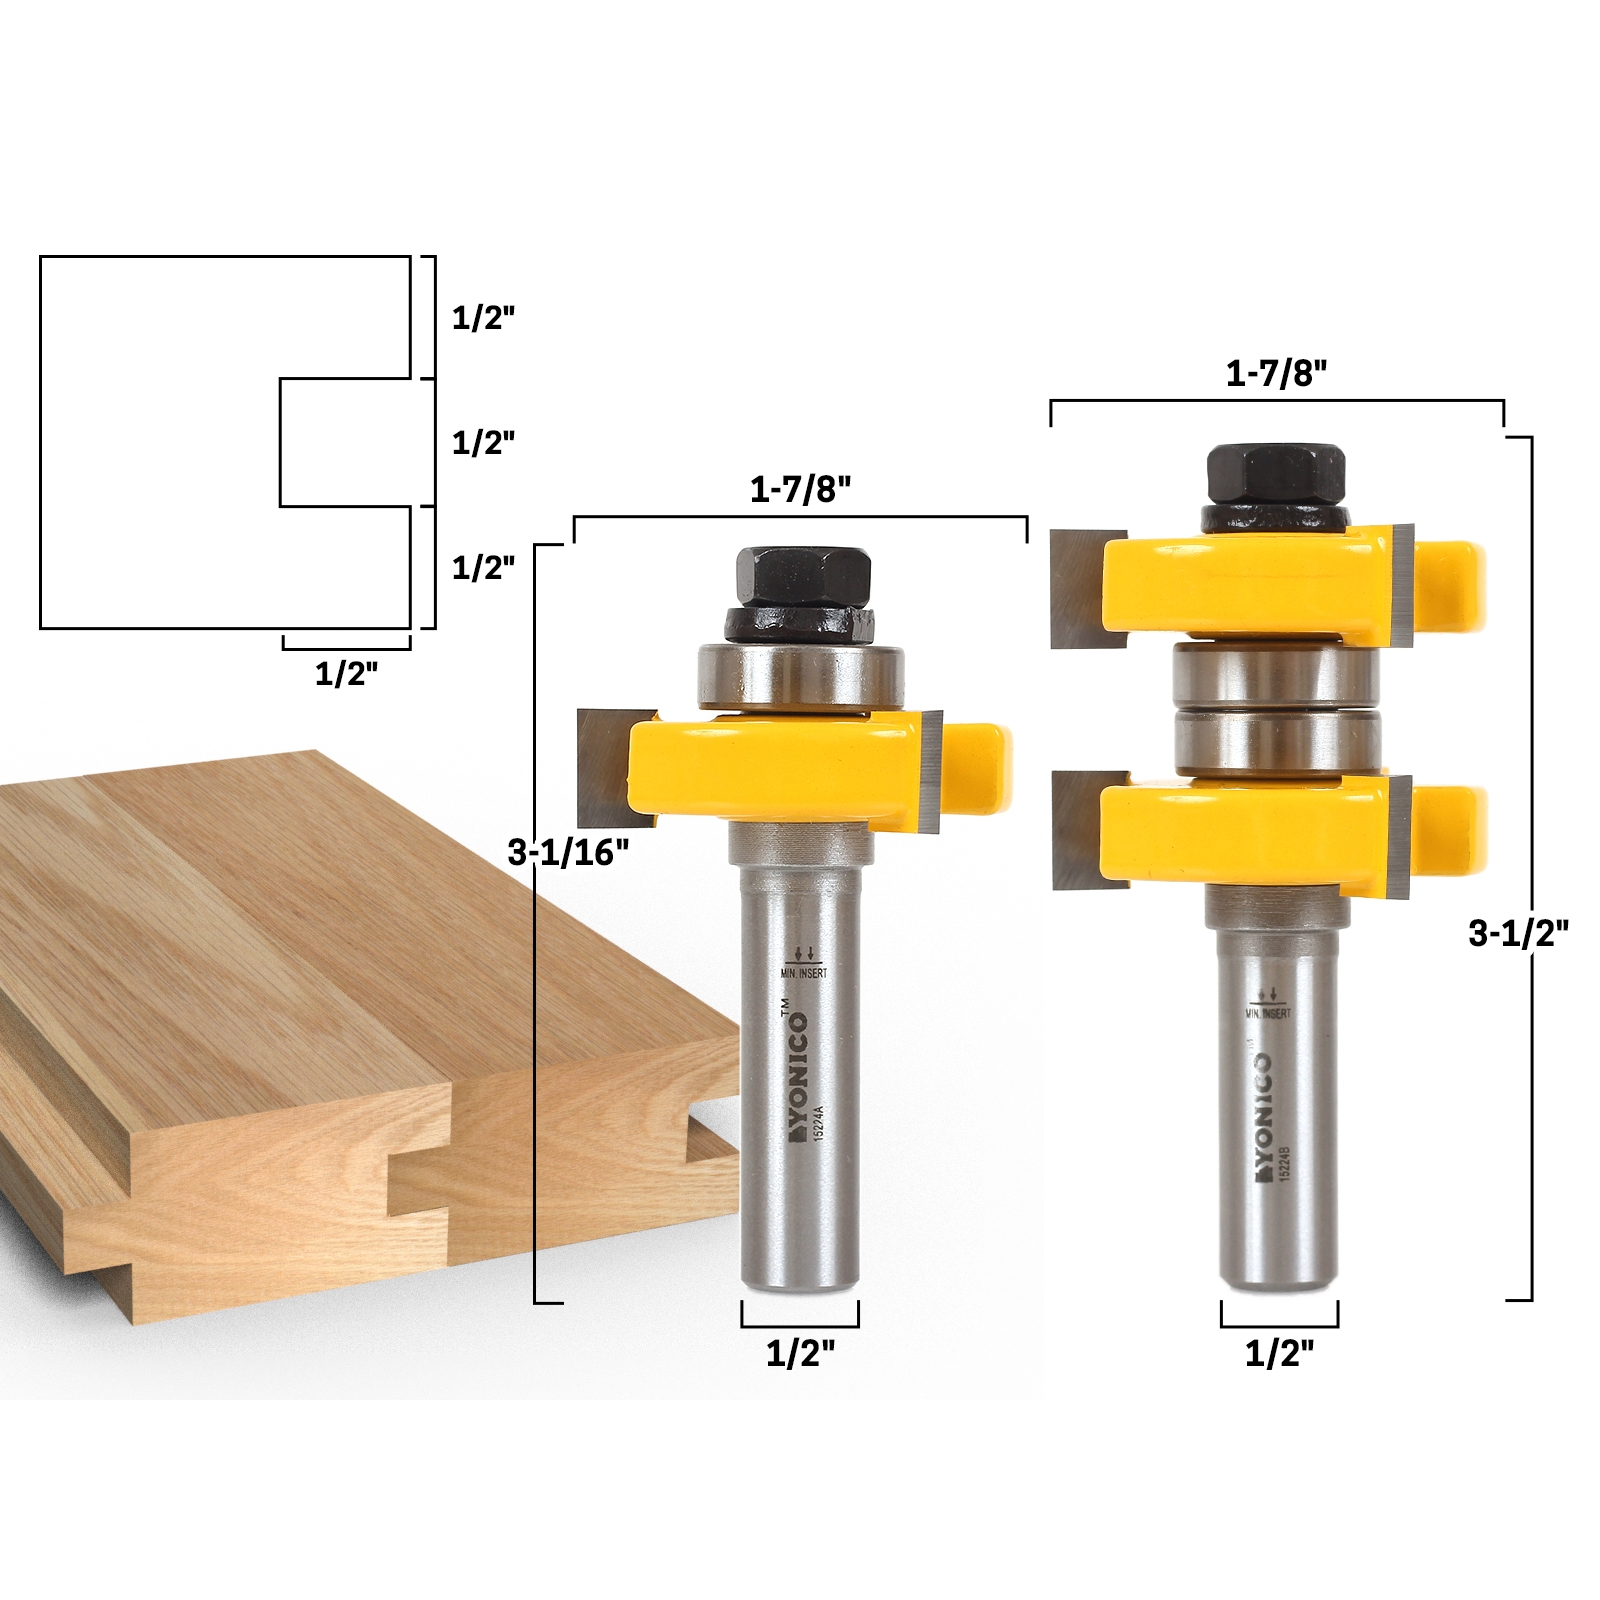 Woodworking Tools for Doors Valiant Tongue & Groove Router Bit Set with Adjustable 1/2 Inch Shank Shelves & More Drawers 2 T Shape Wood Milling Cutters for Professional & Beginner Carpenters